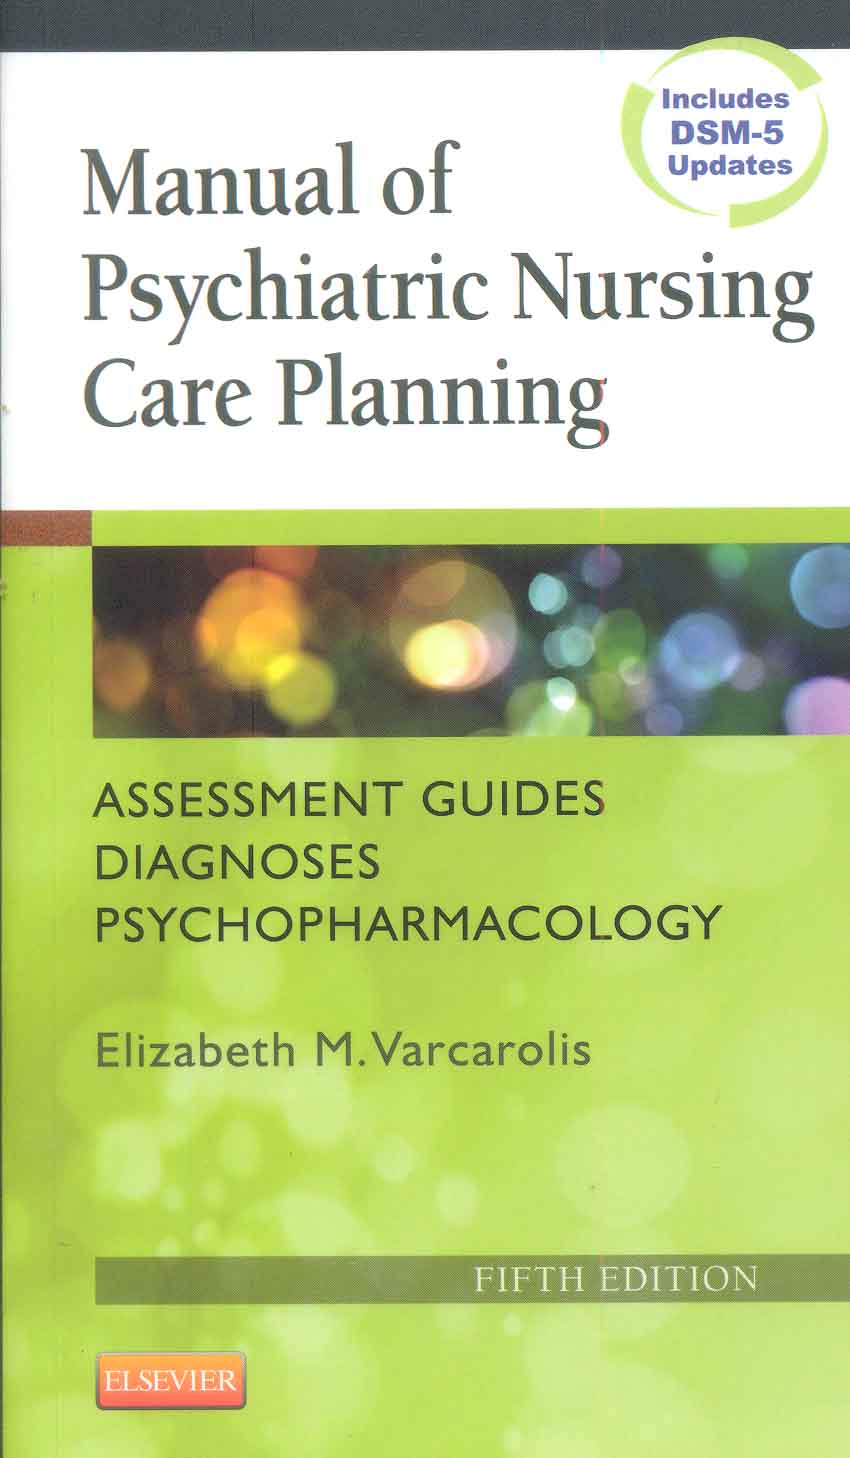 Manual of psychiatric nursing care planning : assessment guides diagnoses psychopharmacology